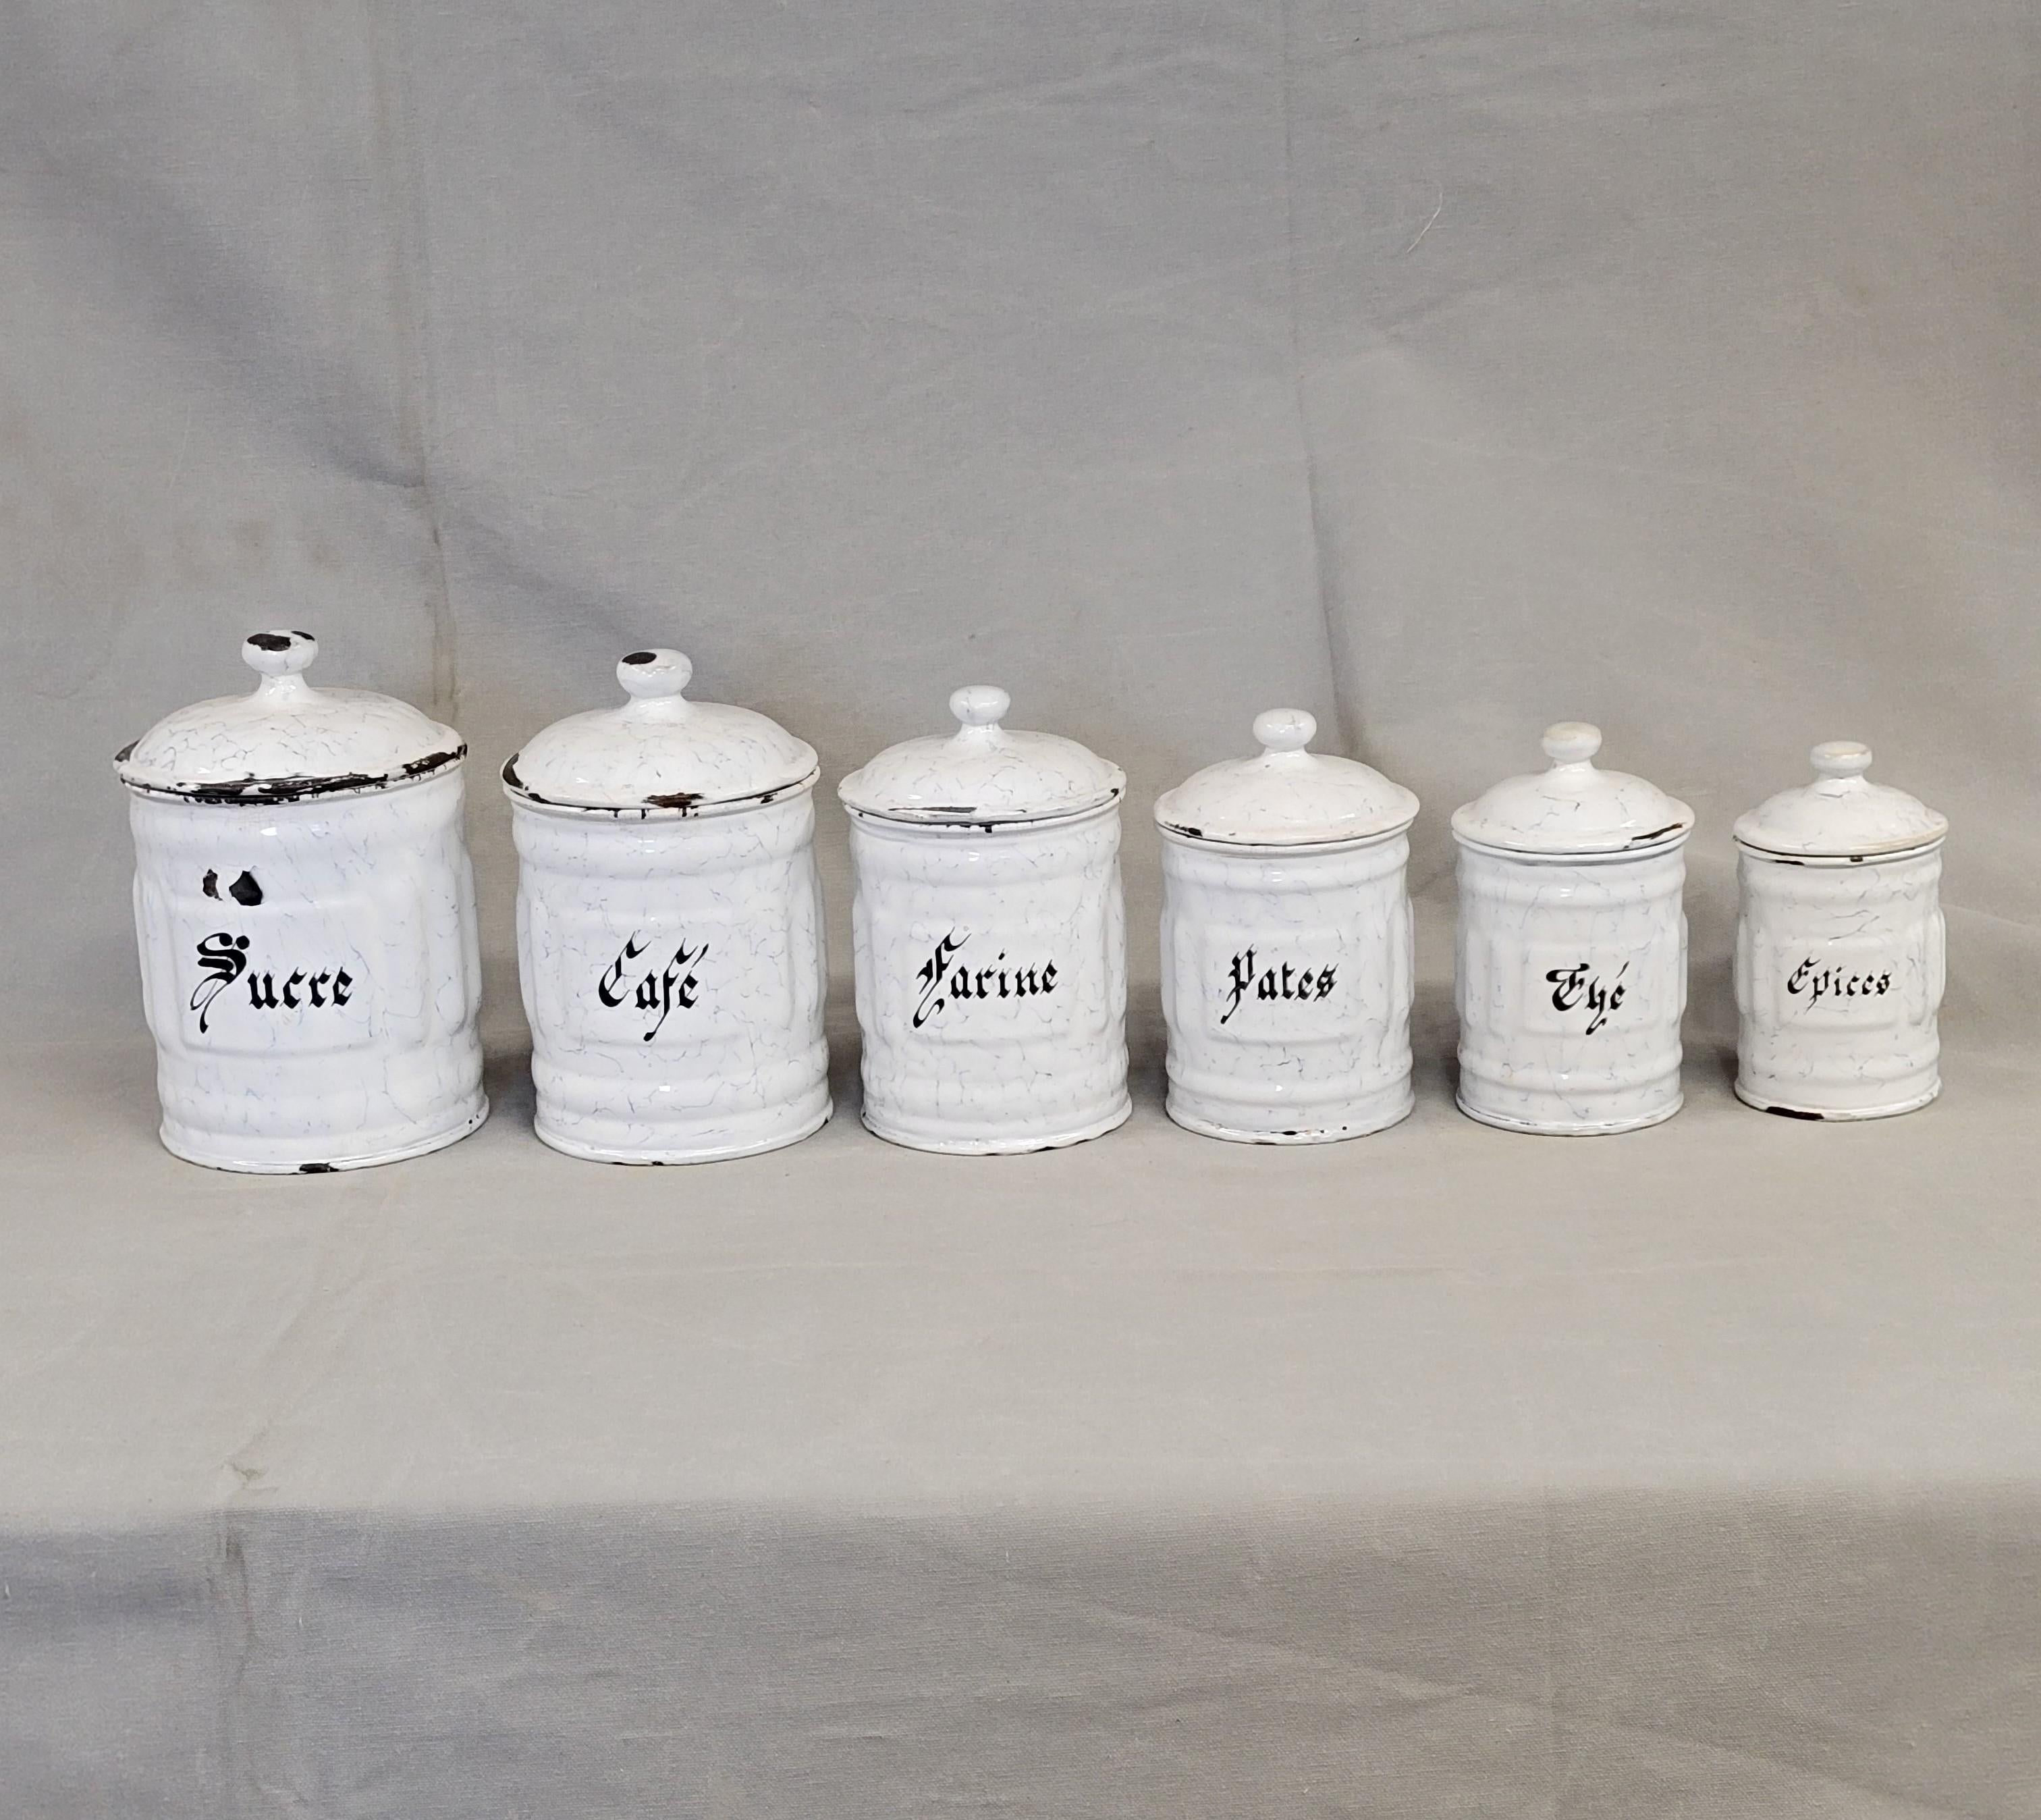 This charming vintage French enamel canister set consists of six lidded canisters. They are white enamel with a hint of pale blue. The black lettering spells out, from large to small: Sucre (sugar), Farine (flour), Cafe (coffee), Pates (pasta), The